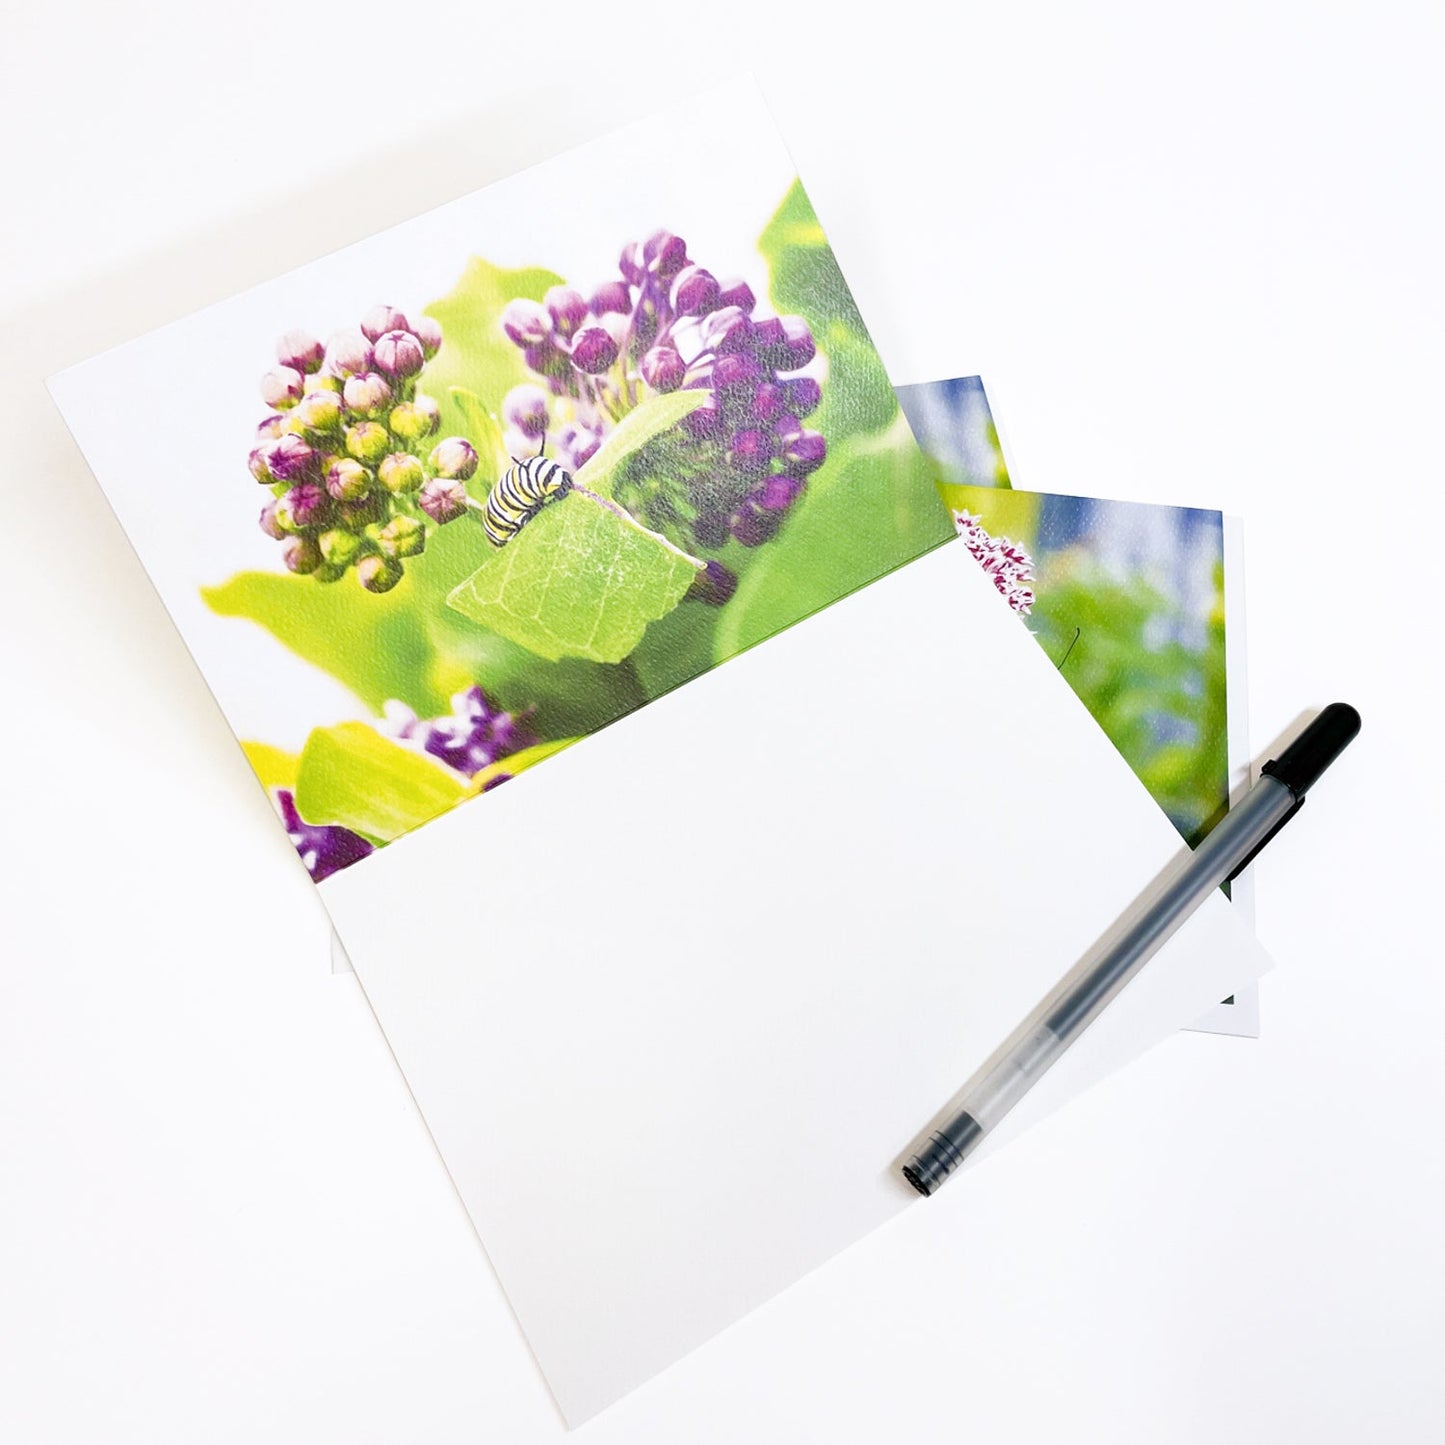 A casually elegant greeting card designed to be shared or displayed as a work of art. Featuring photographs of a monarch butterfly, caterpillar and milkweed.